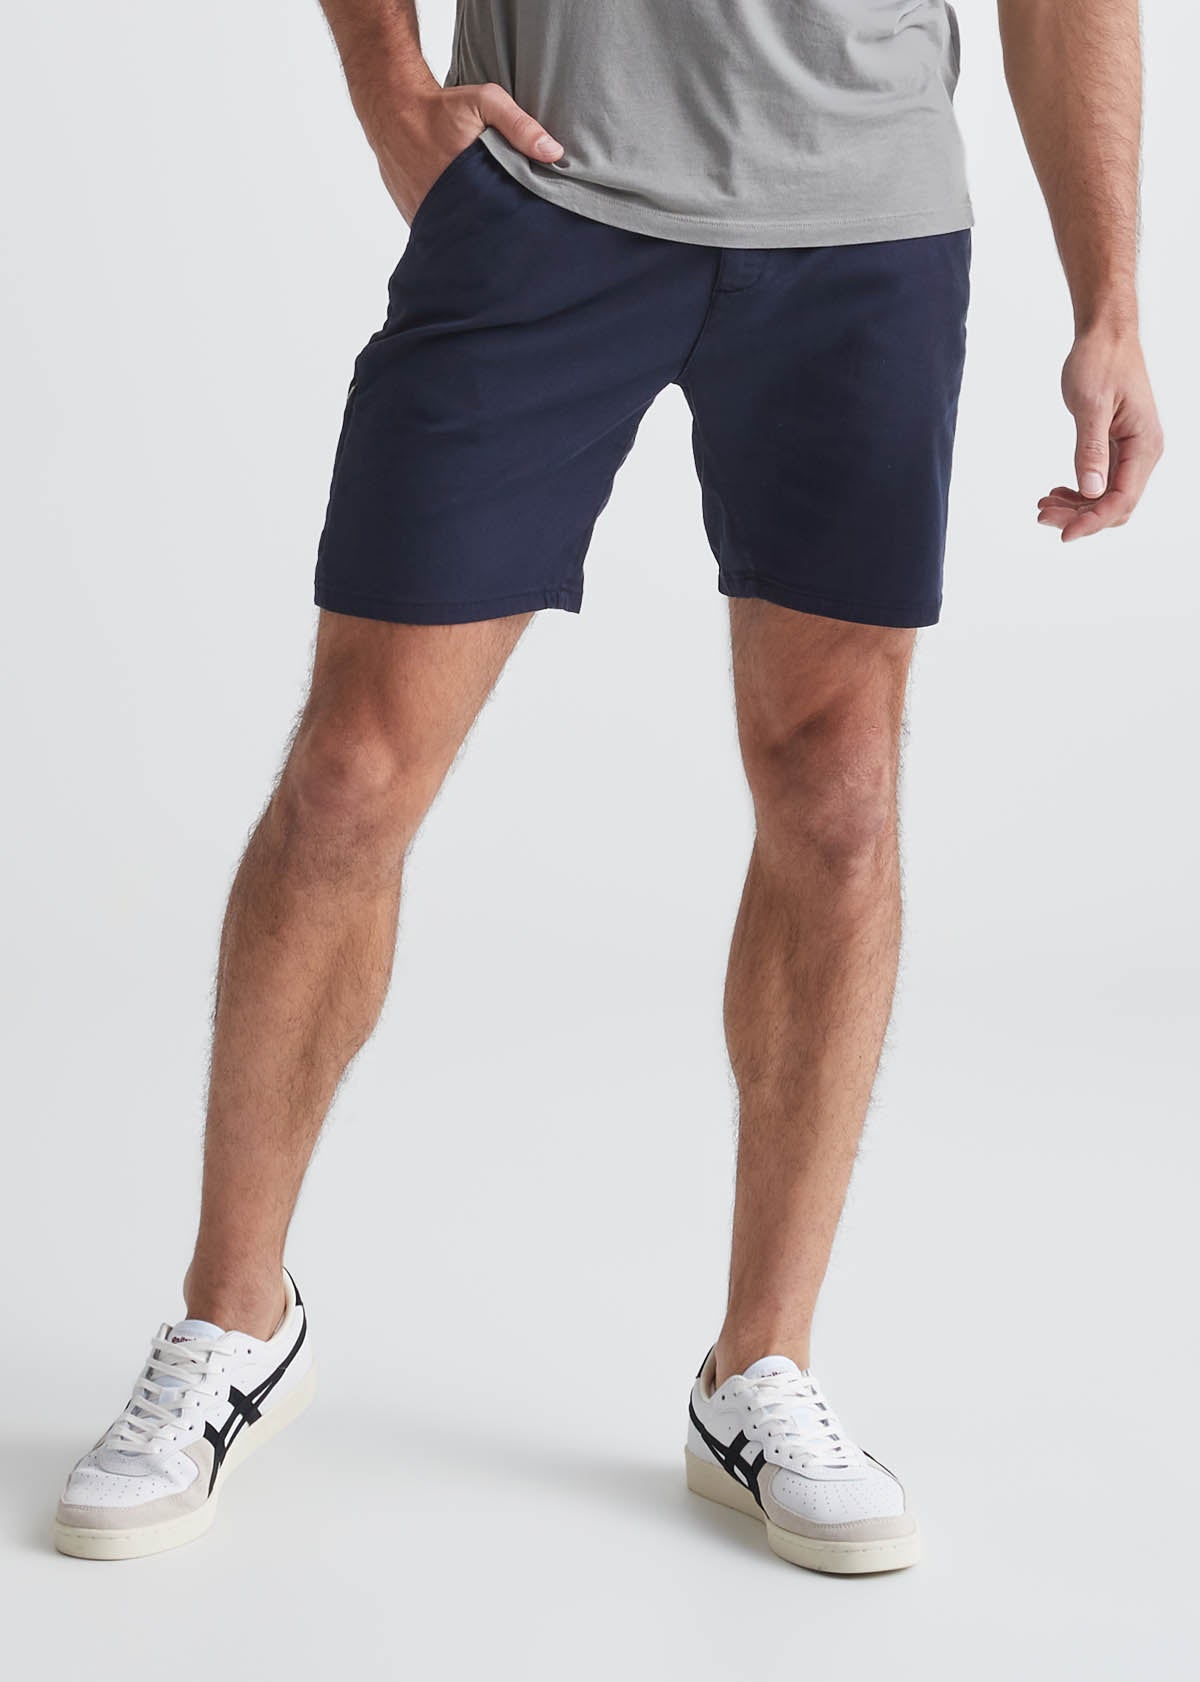 Men's Sport Shorts 7 - All In Motion™ Teal S